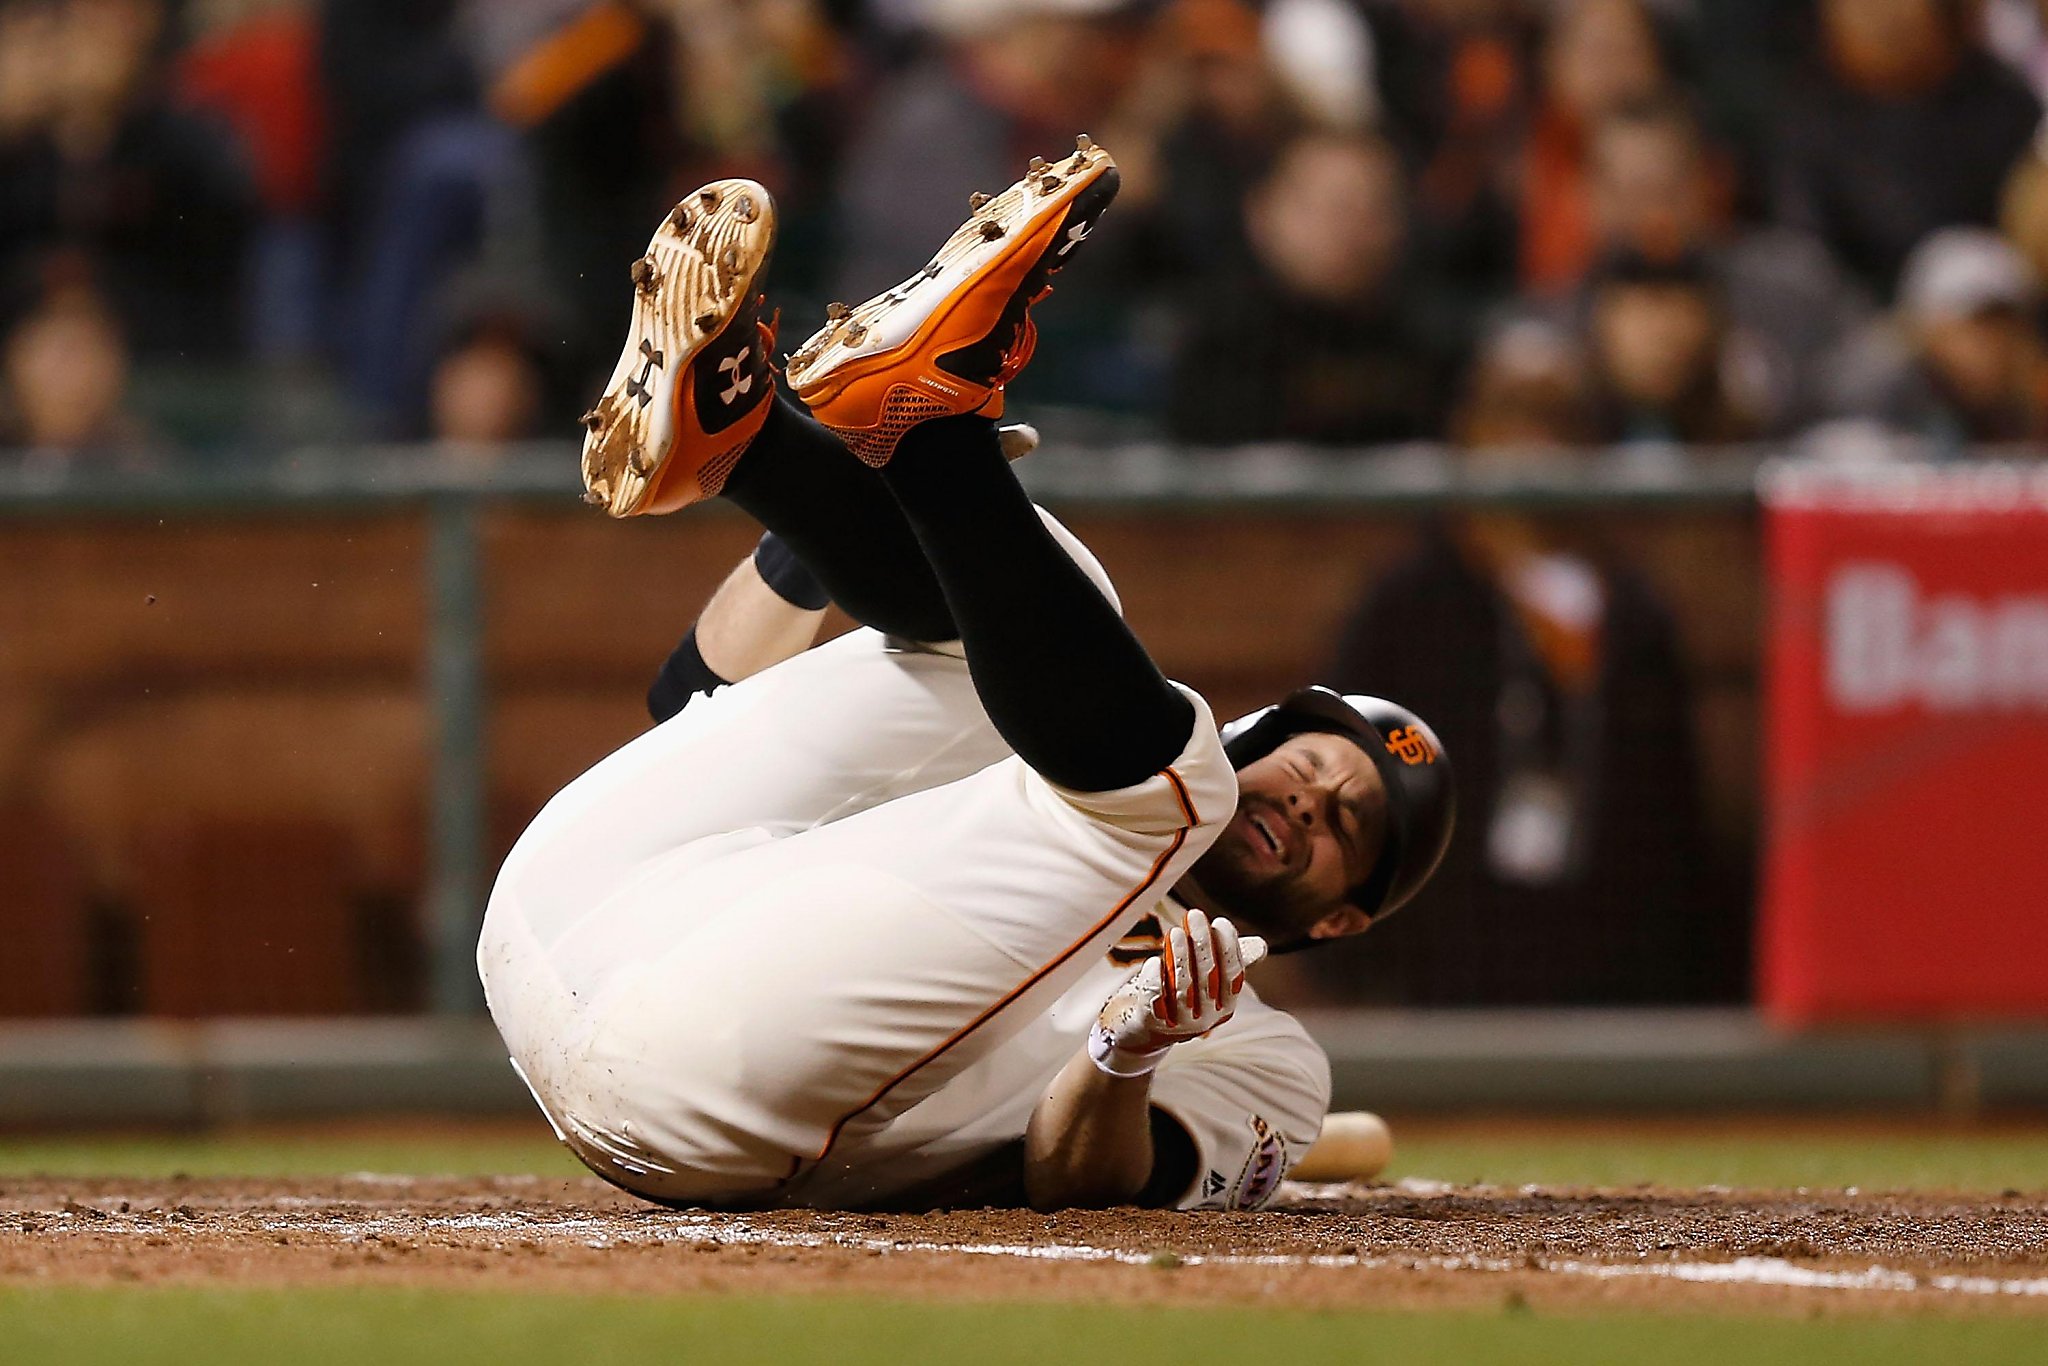 Giants updates: Brandon Belt, rotation, lineups ... and Bumgarner as DH? - SFGate2048 x 1366